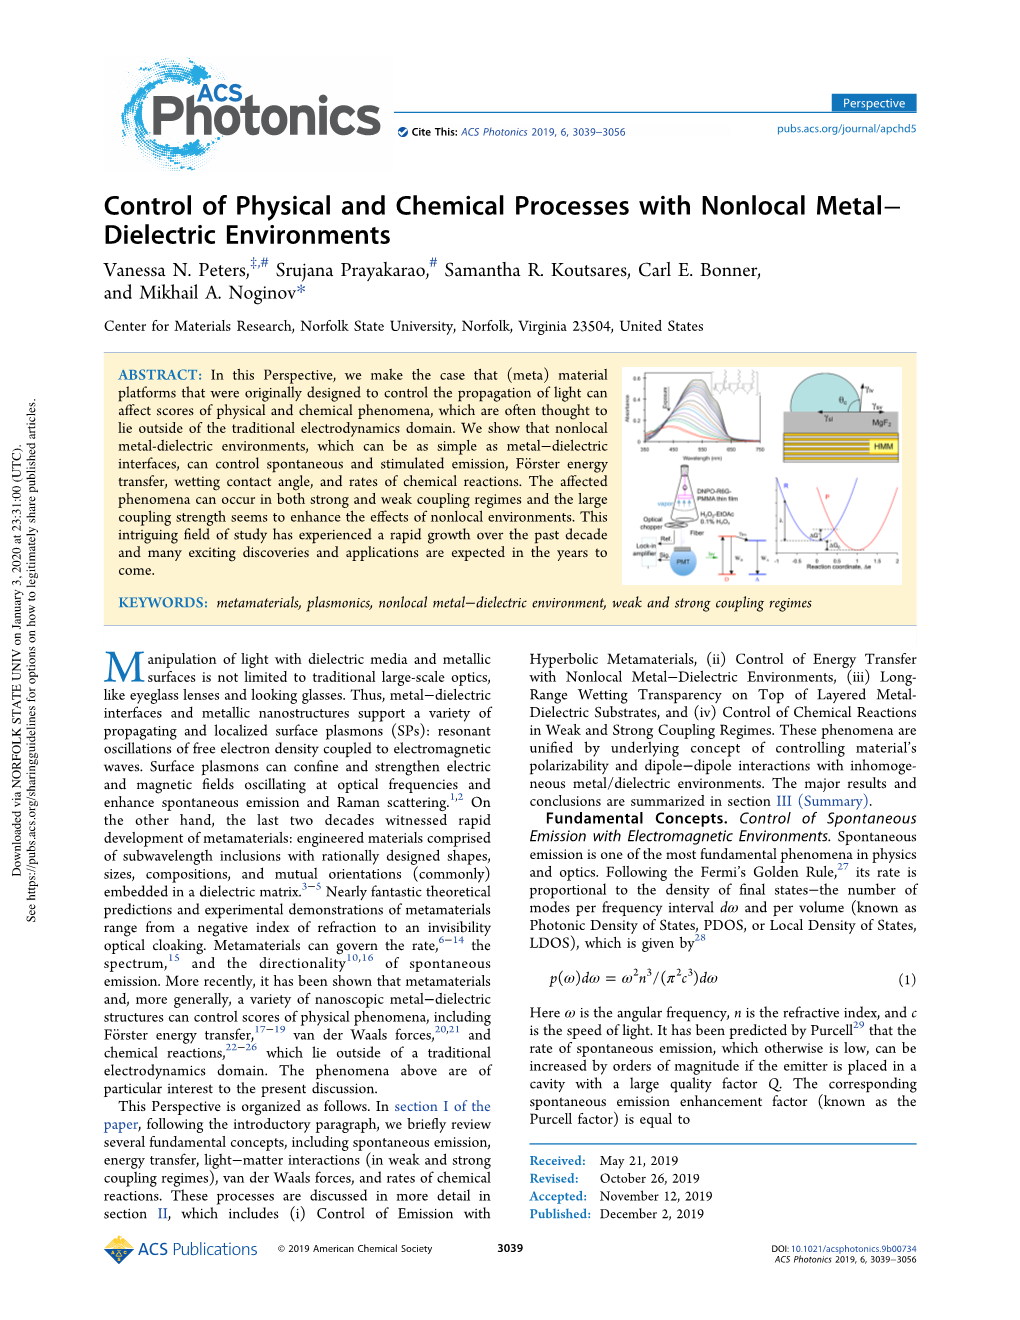 Control of Physical and Chemical Processes with Nonlocal Metal− Dielectric Environments Vanessa N